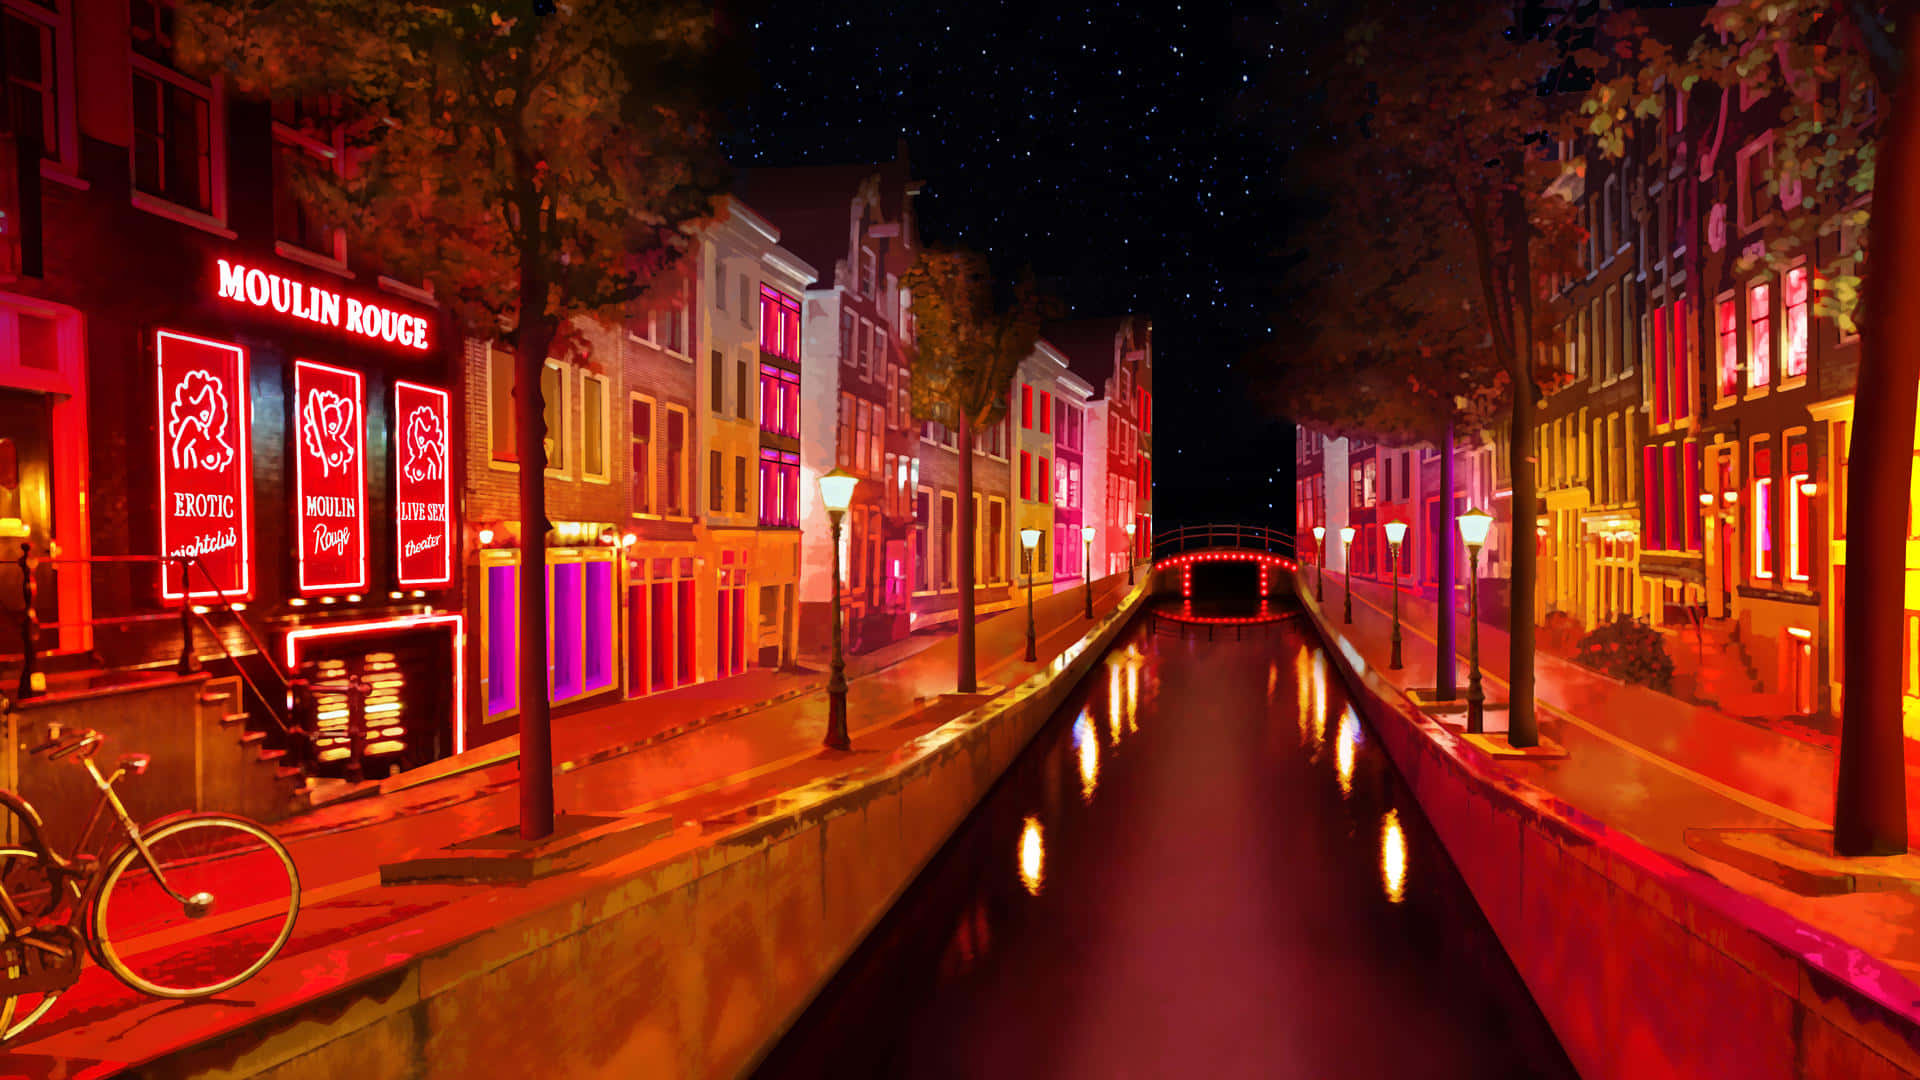 A vibrant night scene in the Red Light District Wallpaper